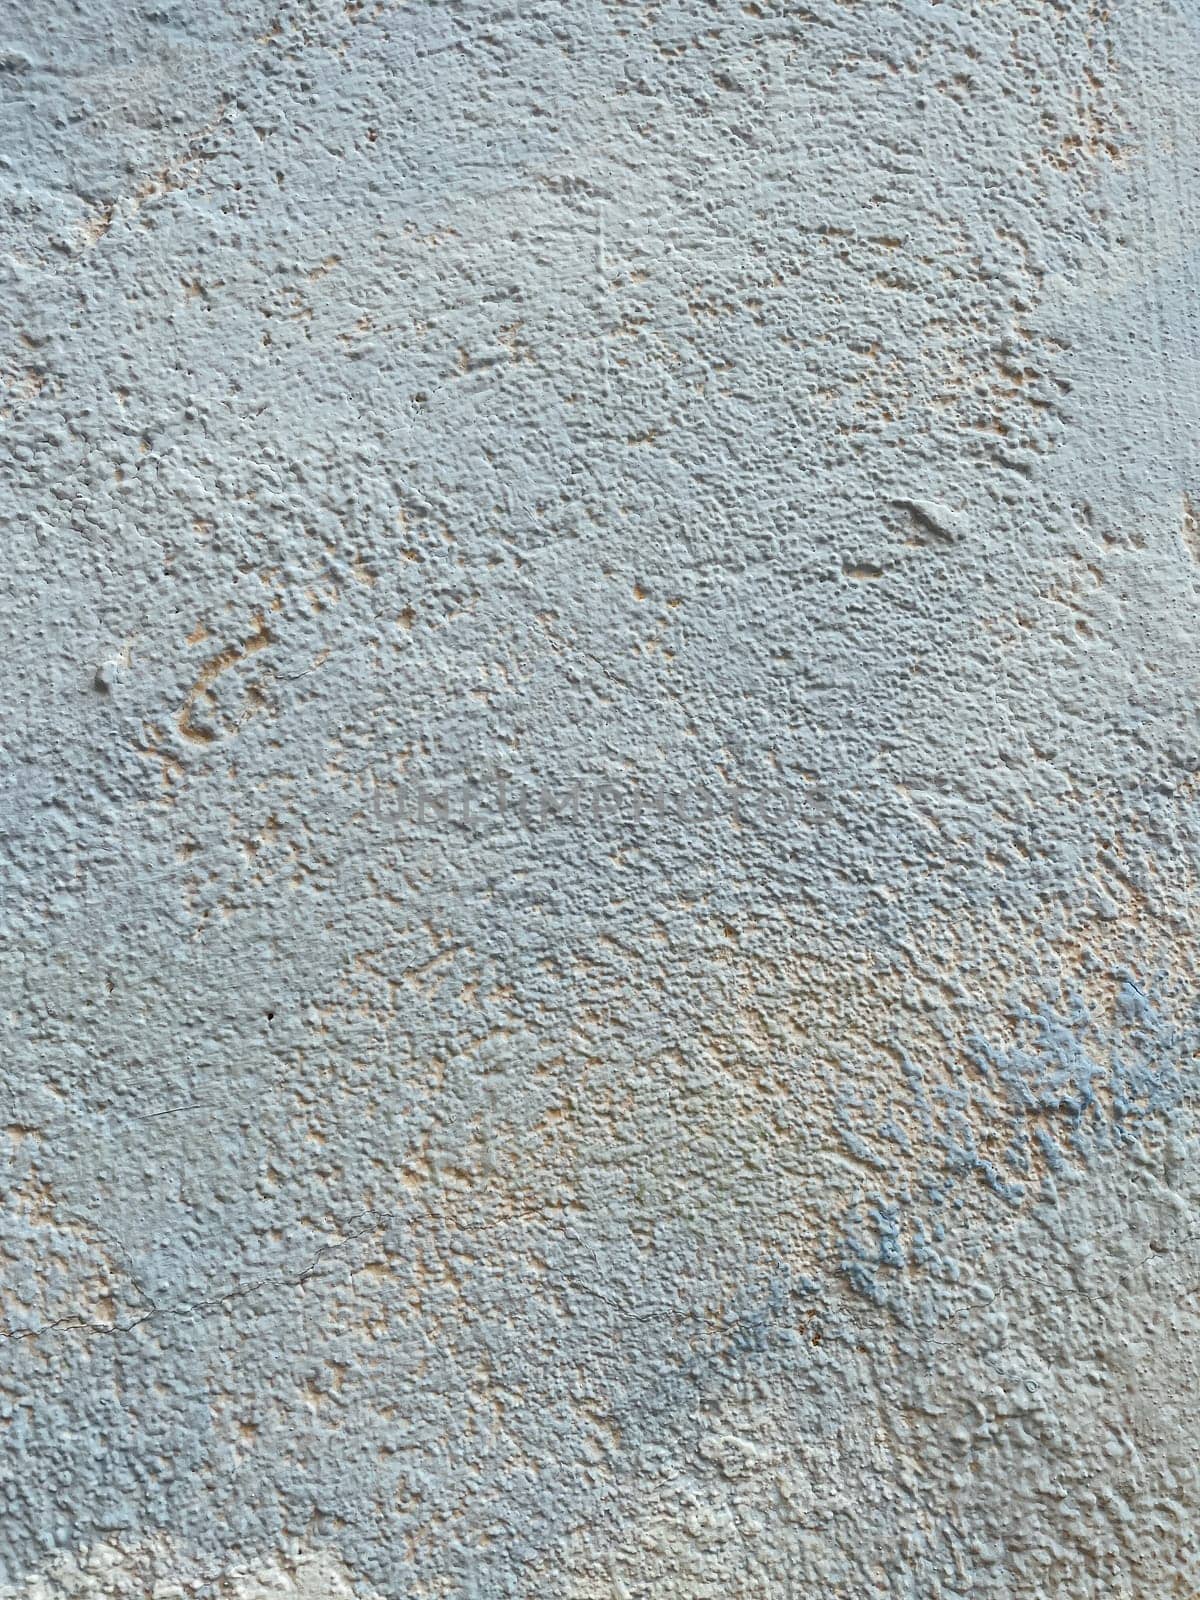 Vintage Grey Wall Texture Structure As Background